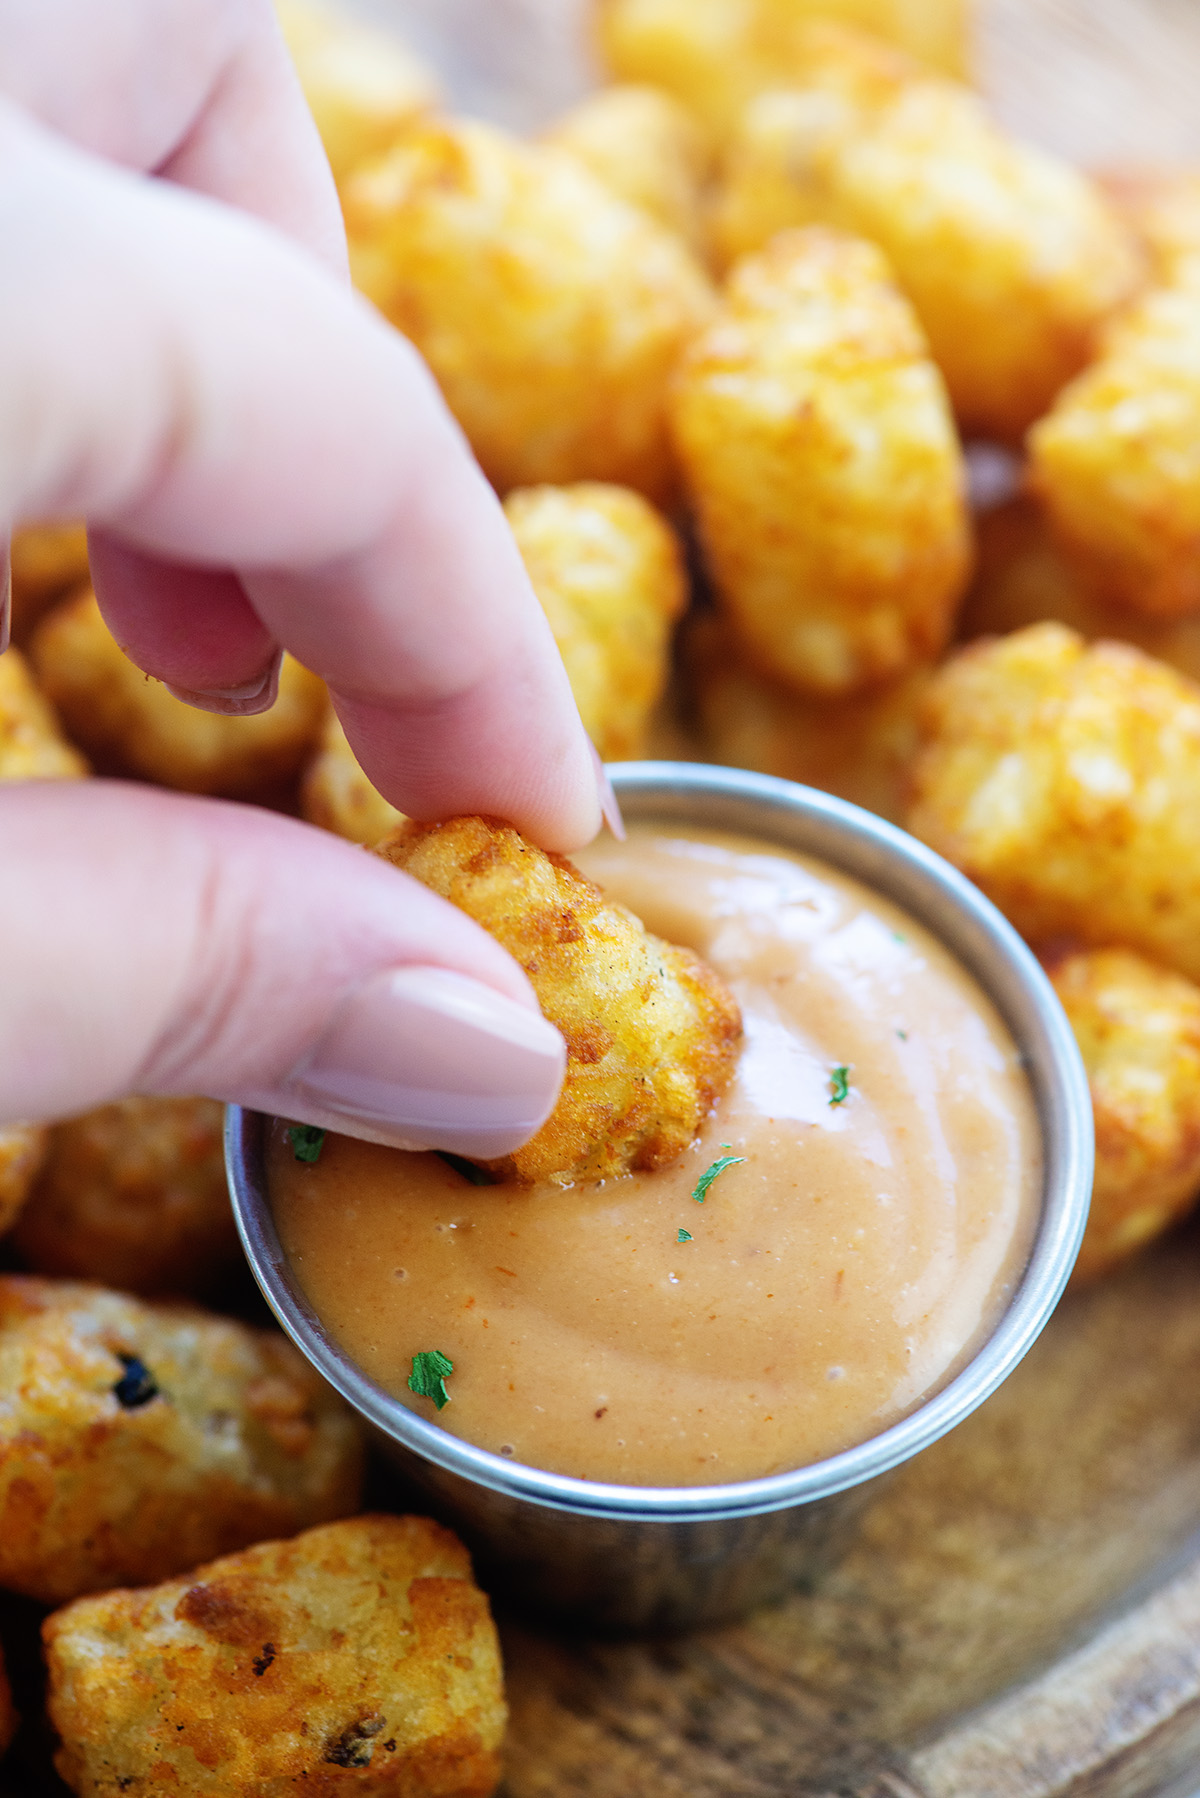 A woman dipping tater tots into a cup of tater tot dip.